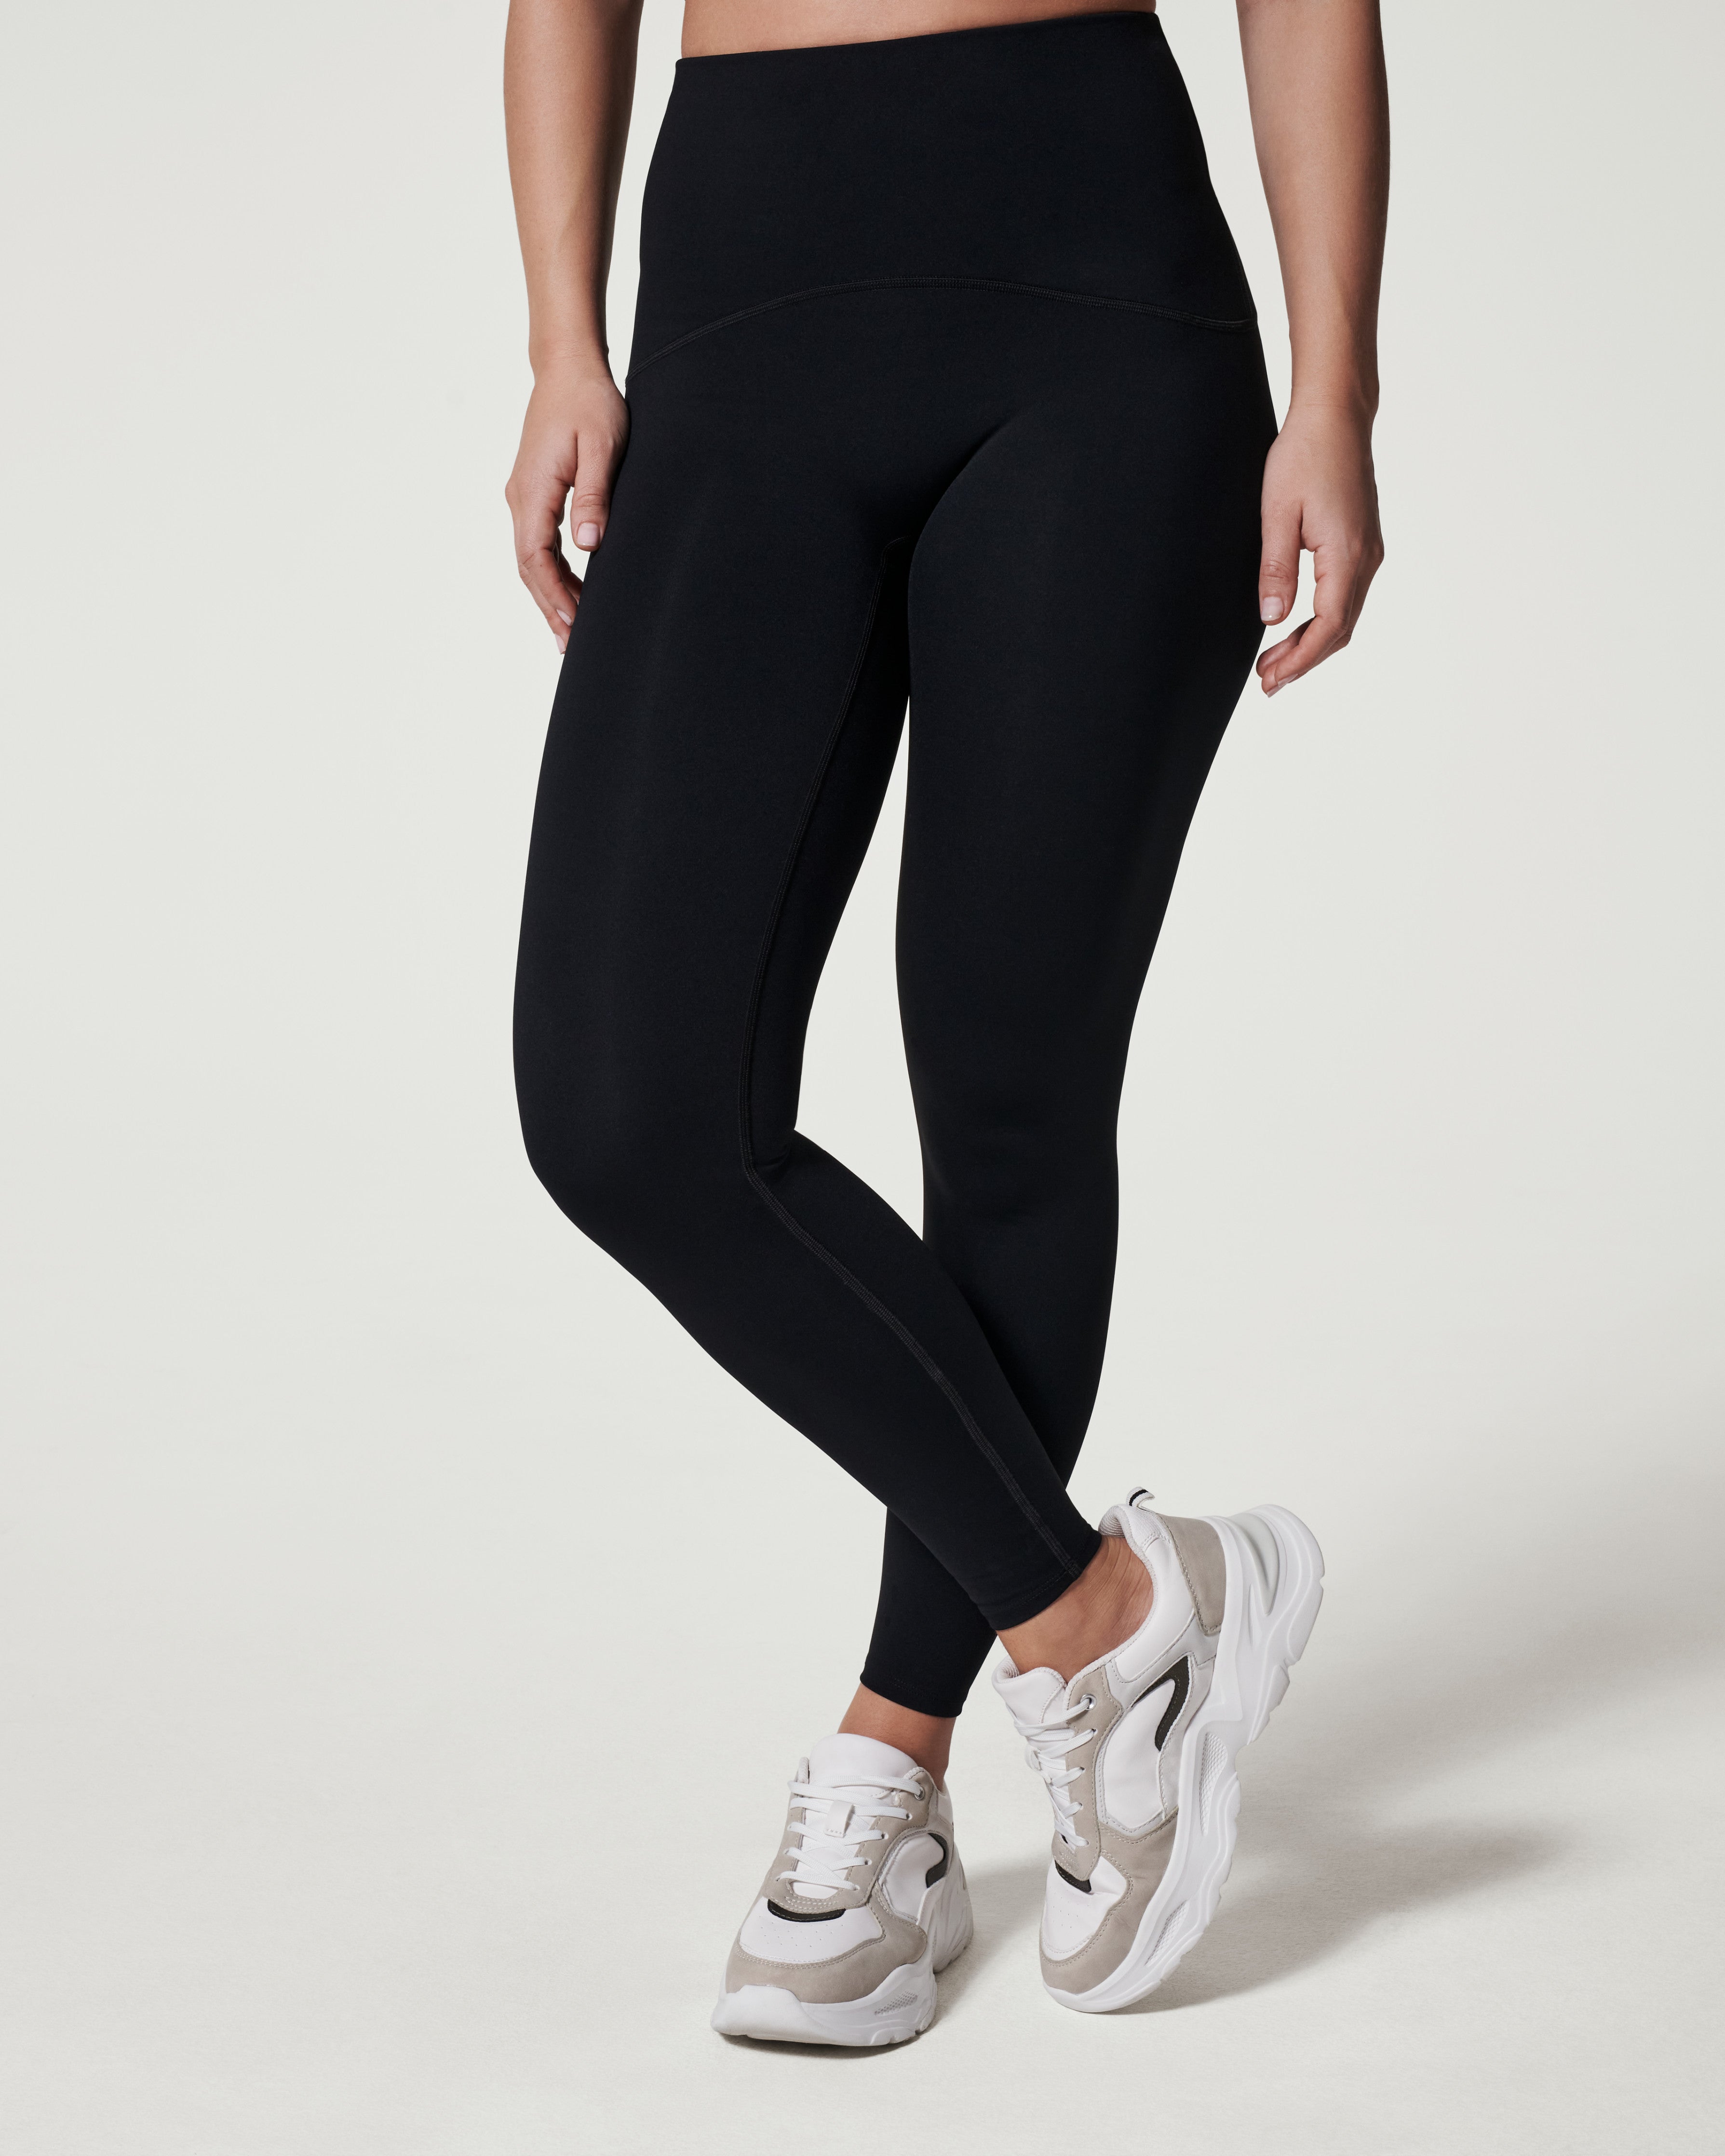 Spanx Leggings Booty Boost Active Knee-Length Compression 550